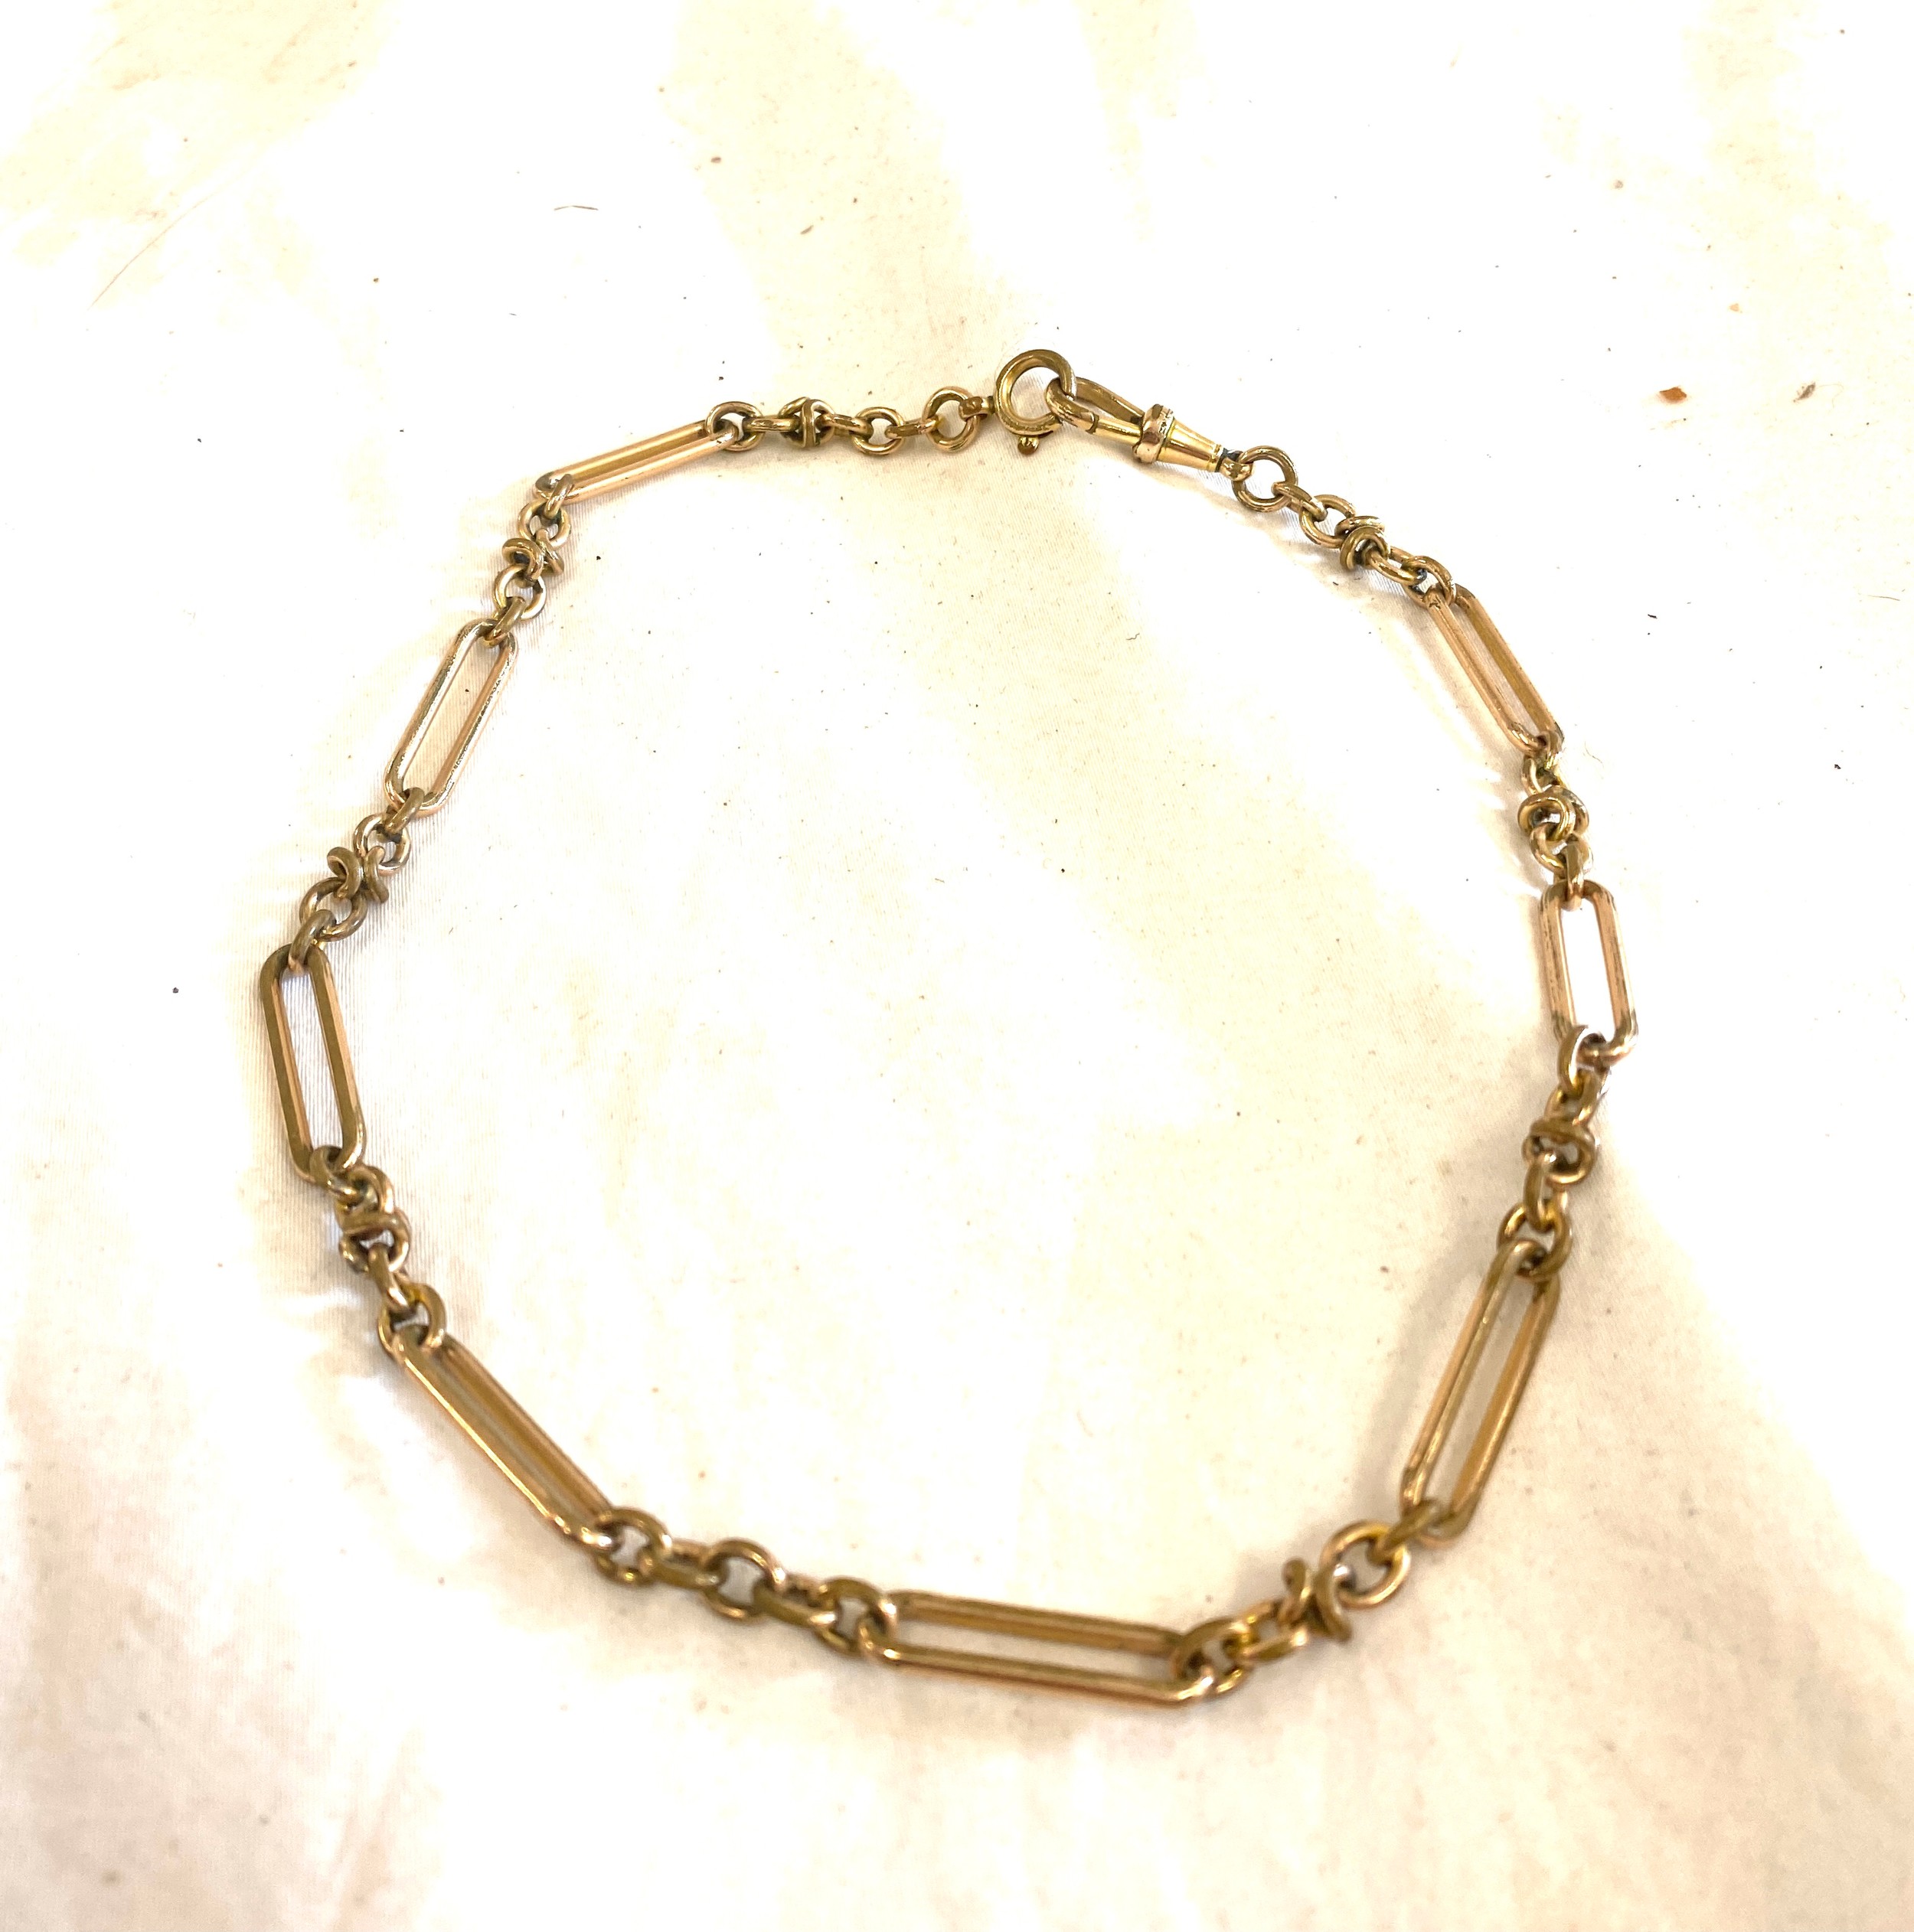 Victorian rolled gold watch chain - Image 2 of 2